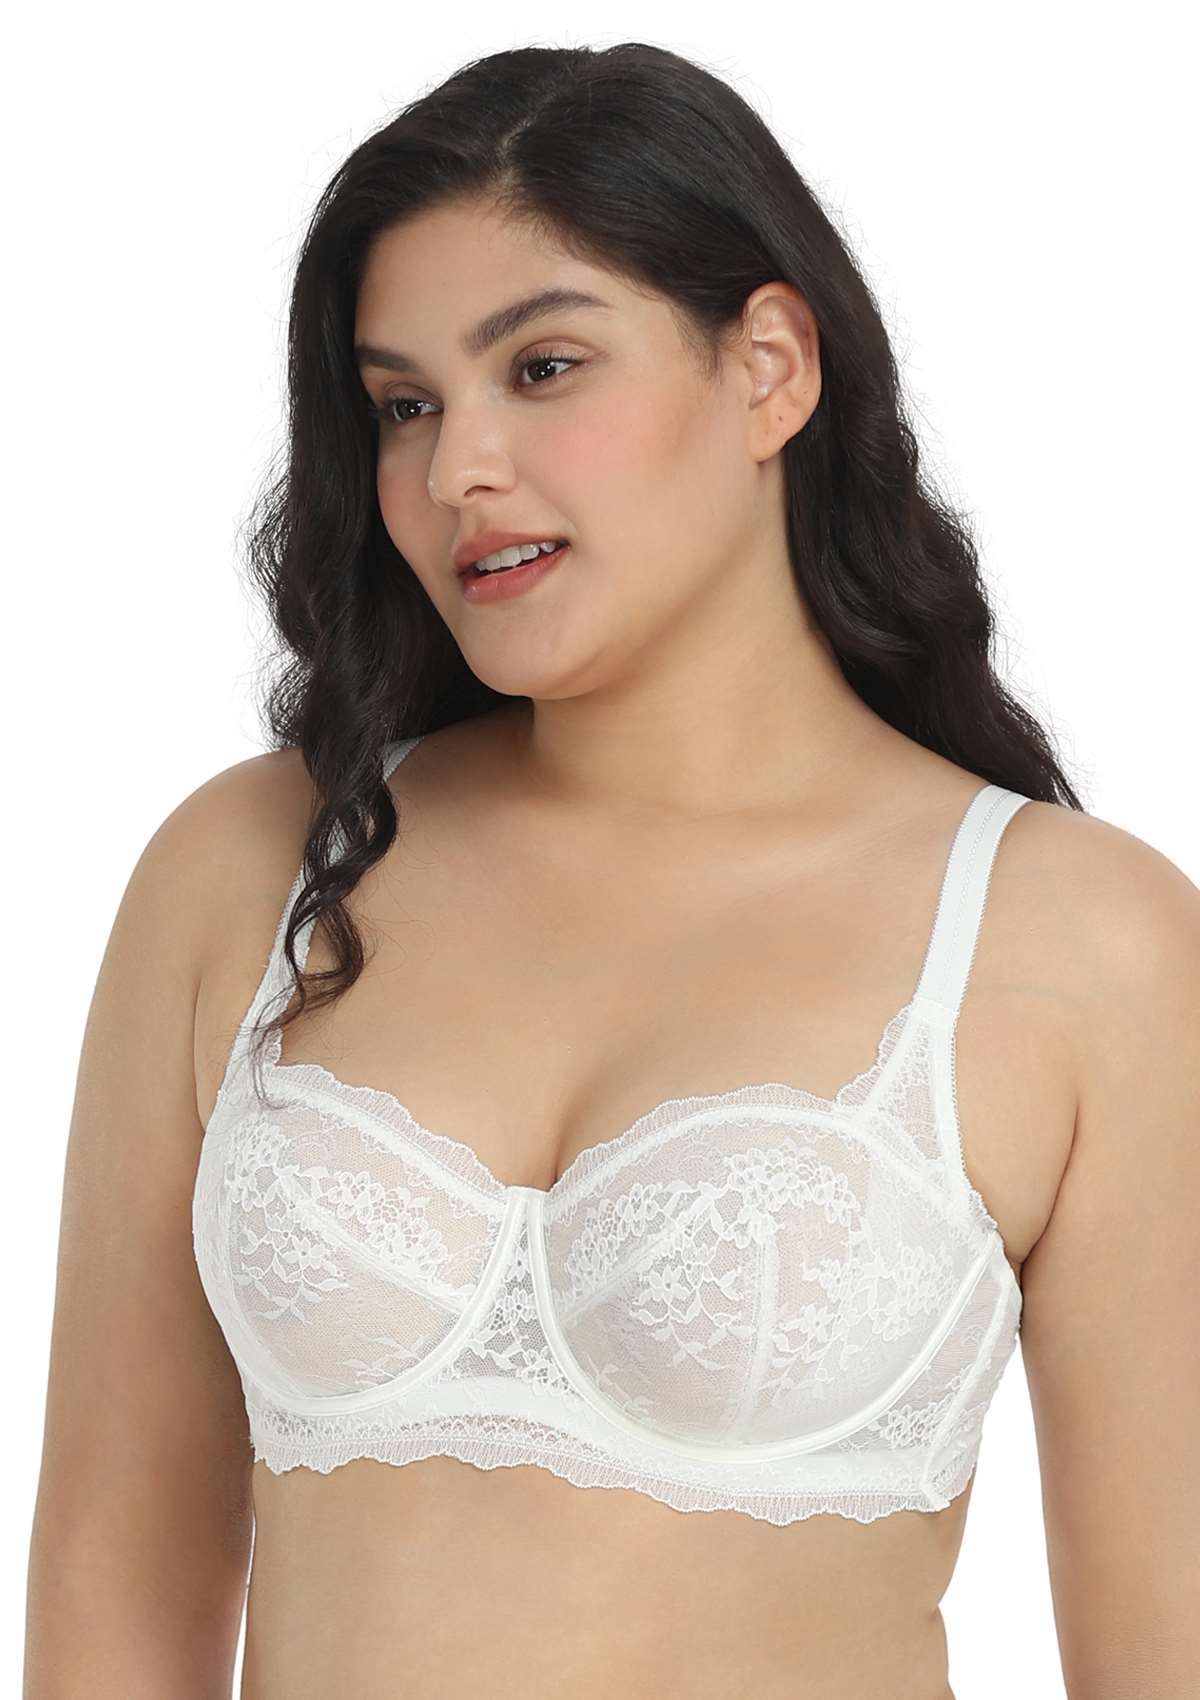 HSIA I Do Floral Lace Bridal Balconette Beautiful Bra For Special Day - White / 42 / D